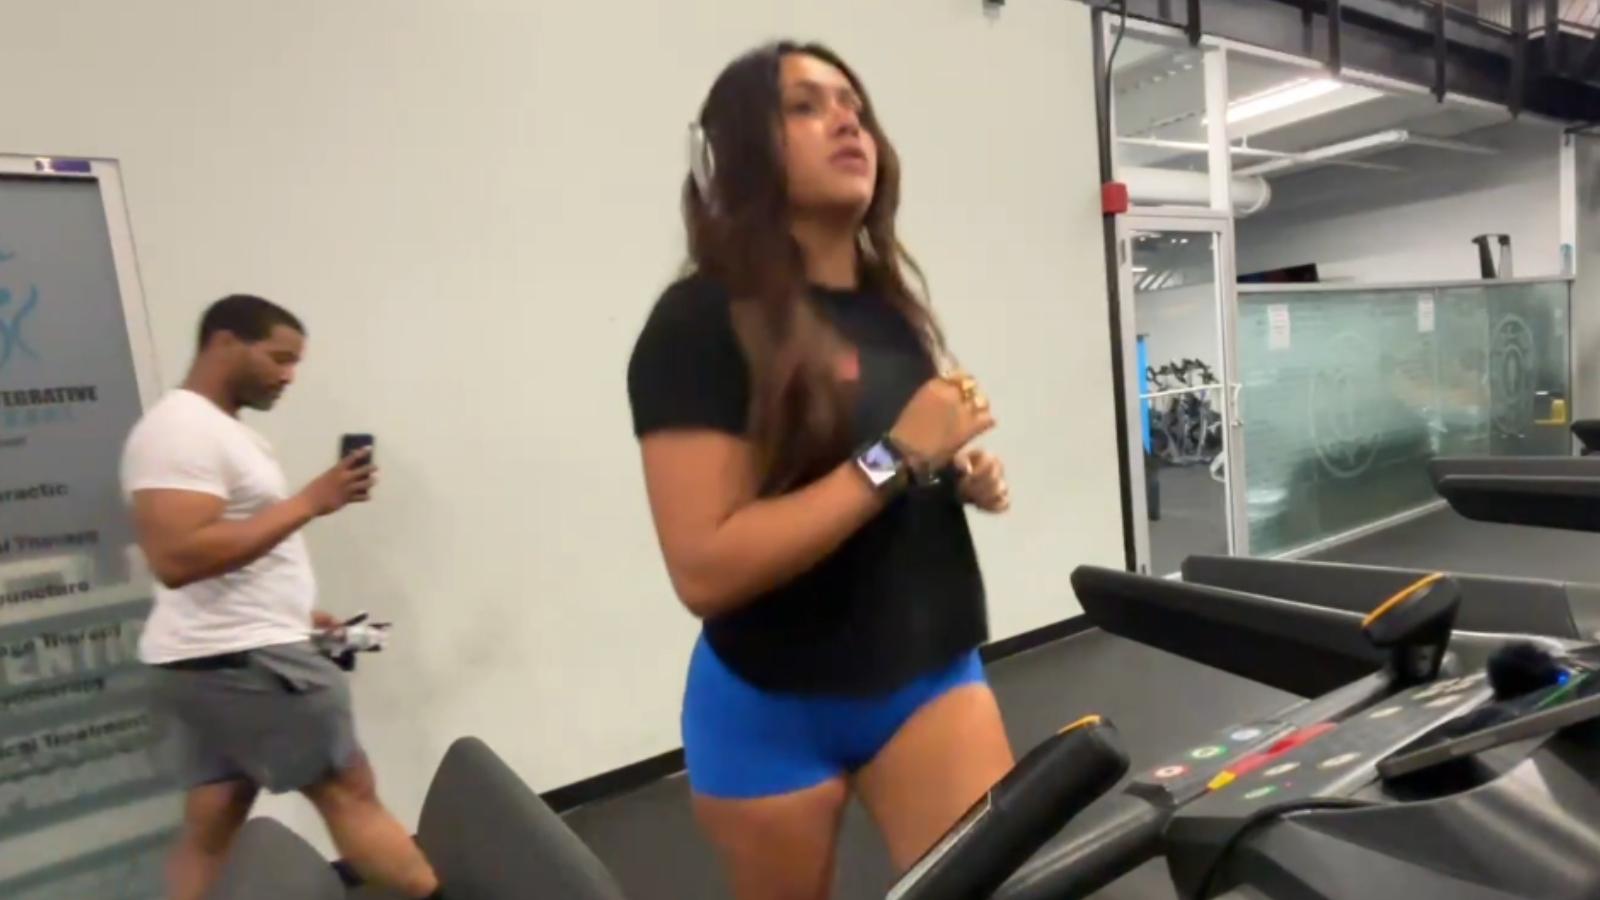 demisux working out on treadmill at gym